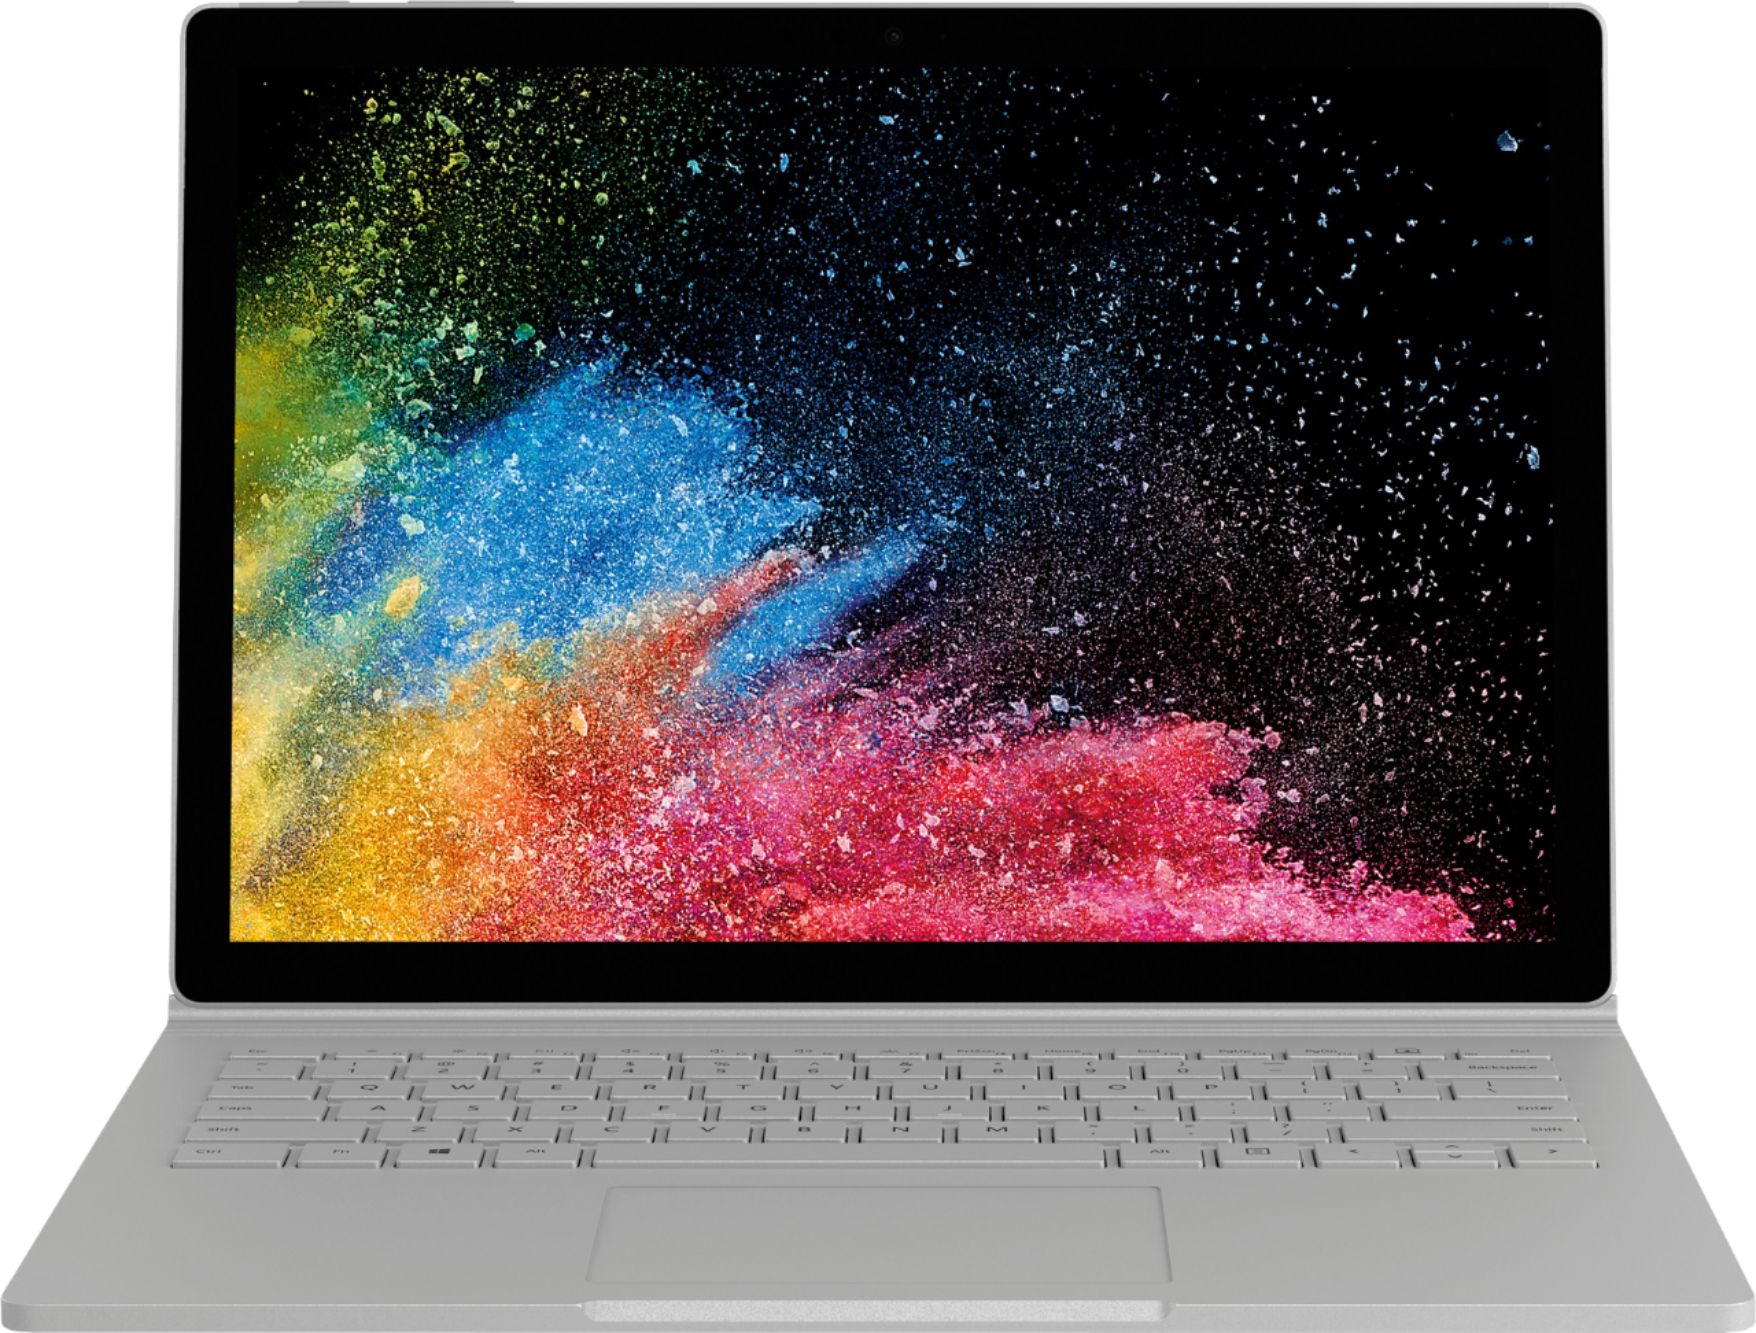 Angle View: Microsoft - Geek Squad Certified Refurbished Surface Laptop 3 13.5" Touch-Screen - Intel Core i5 - 8GB Memory - 256GB SSD - Platinum